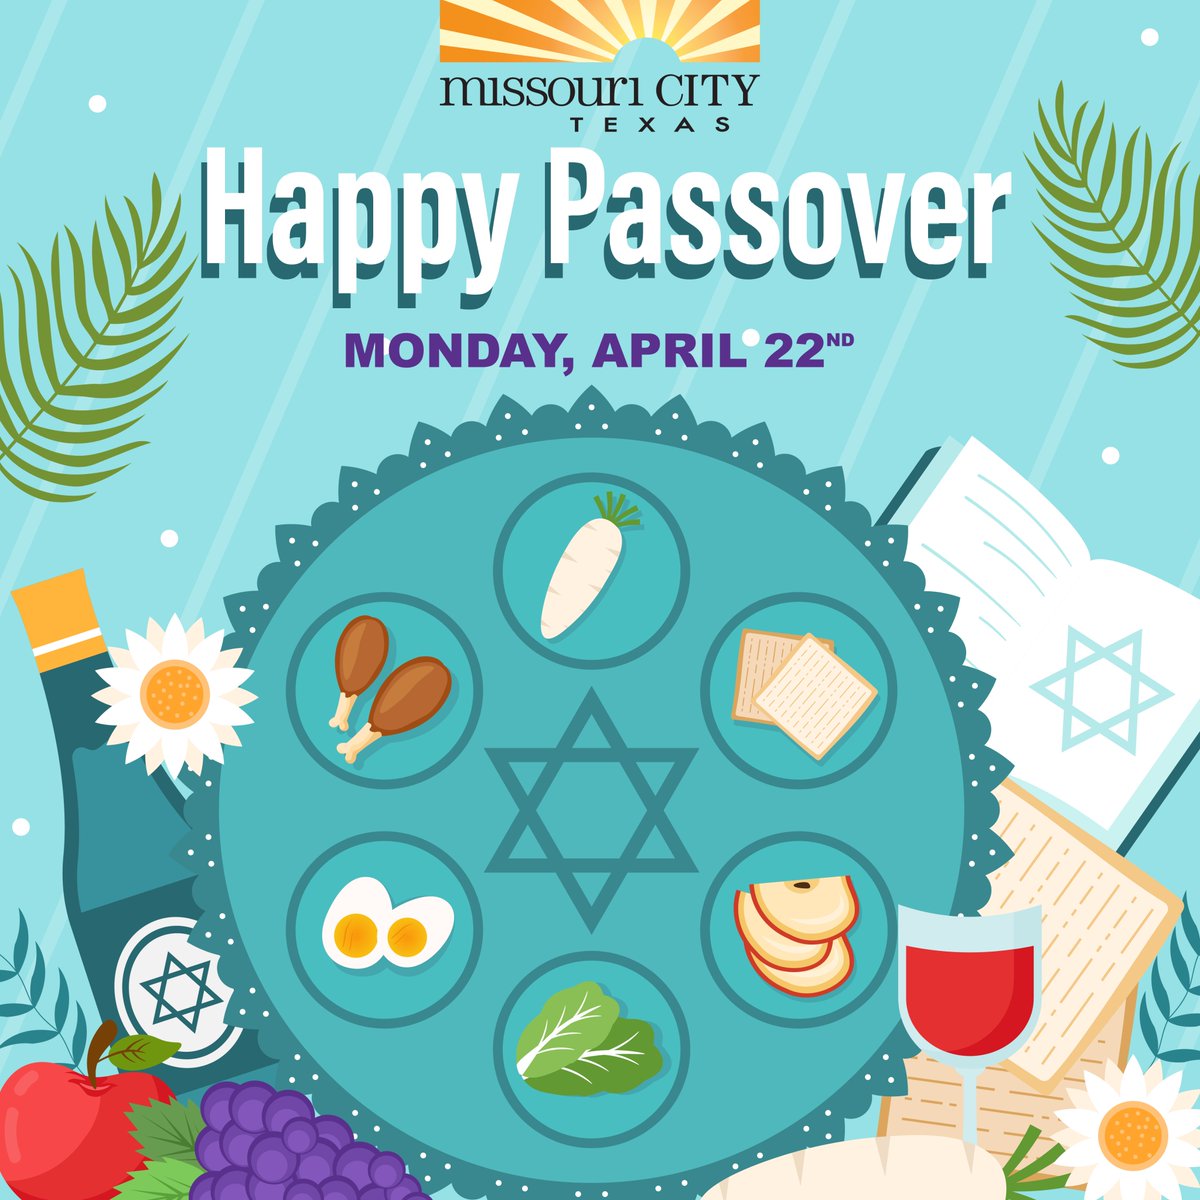 On behalf of the City of Missouri City, we want to wish you all prosperity, joy, and peace this Passover. May you and your family be blessed!